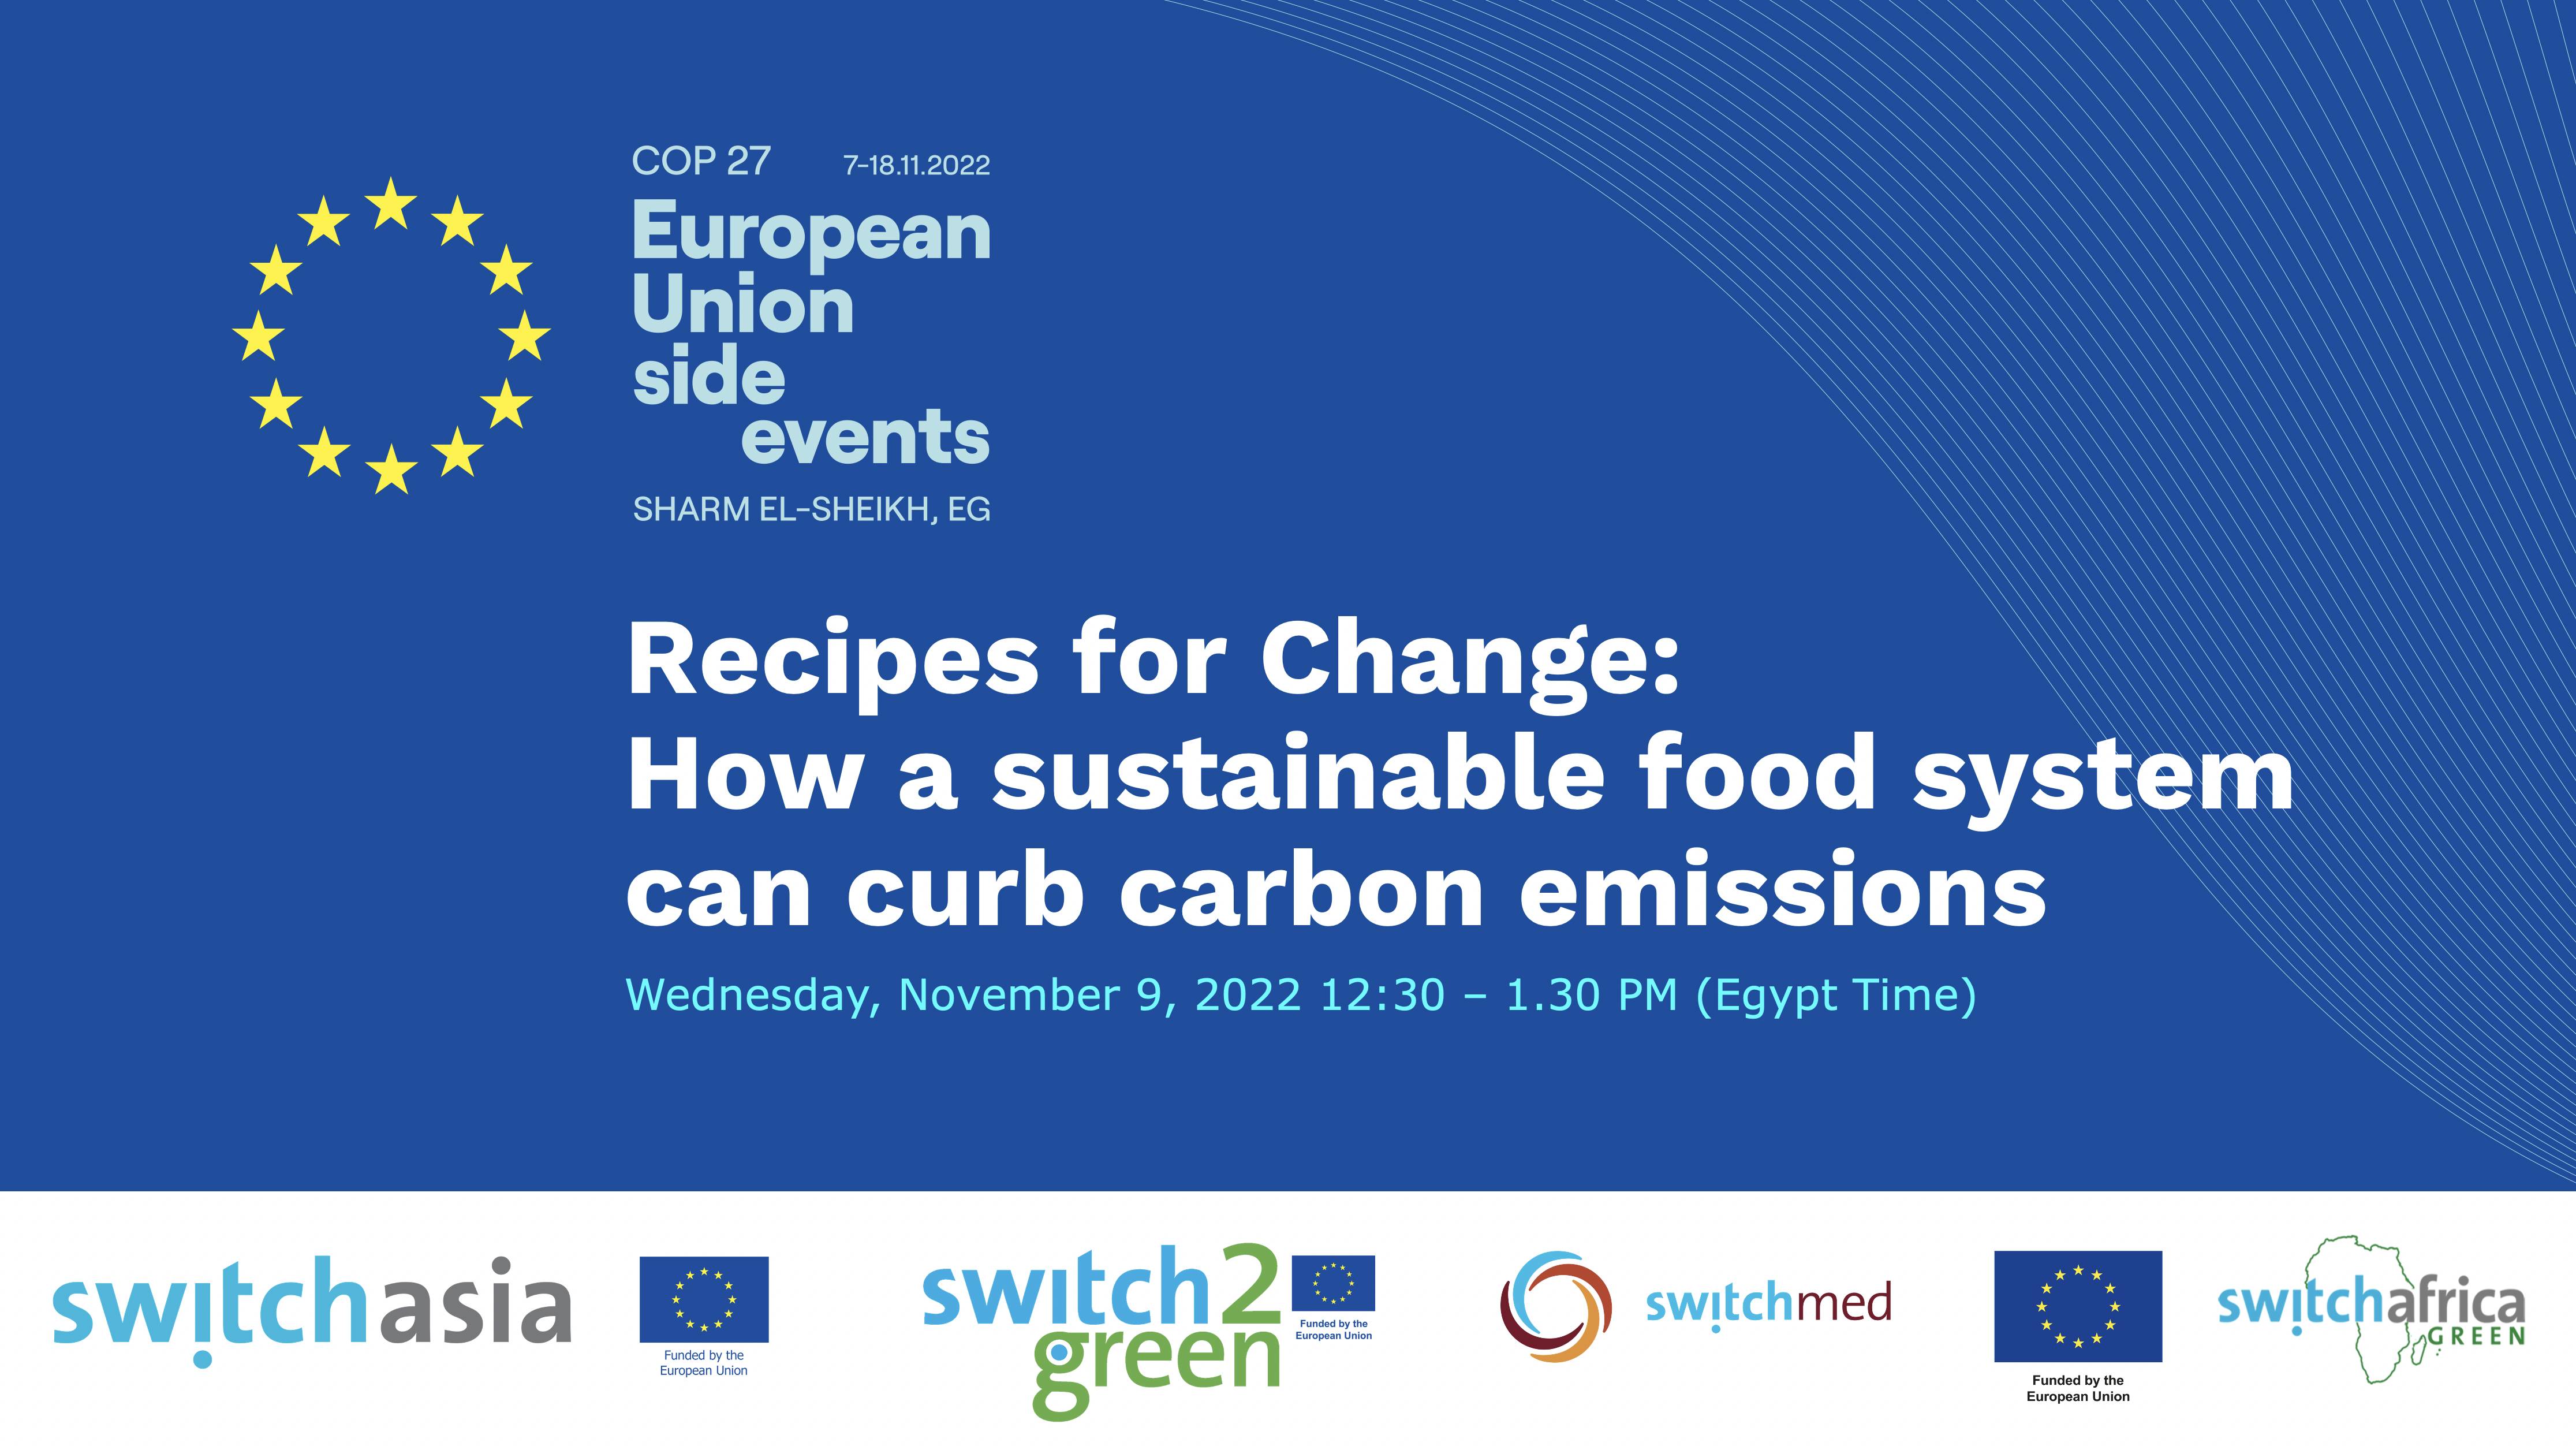 COP27 Recipes for Change: How a sustainable food system can curb carbon emissions